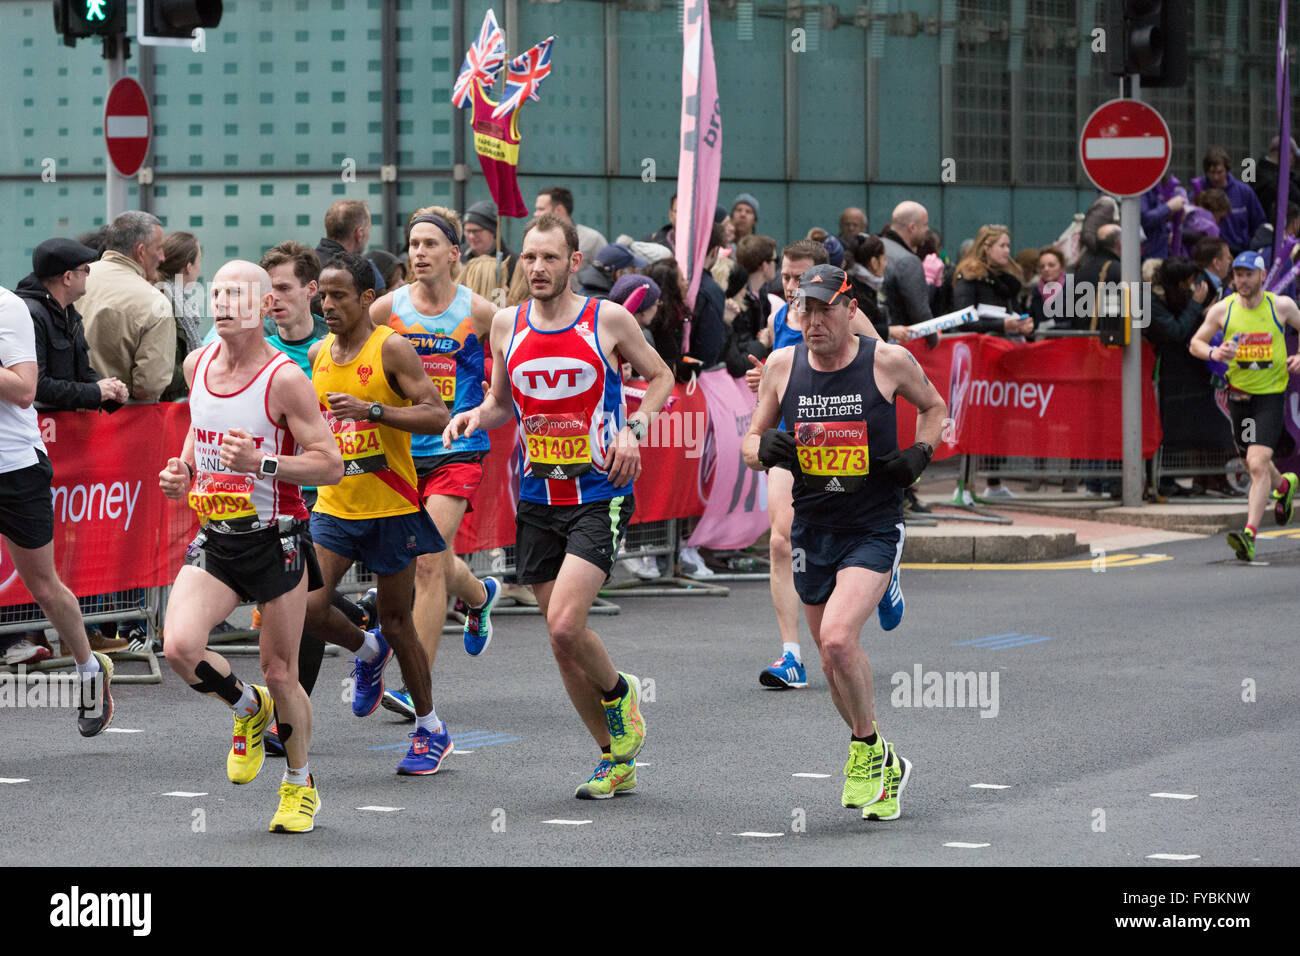 Competitors in the London Marathon running through the Canary Wharf ...